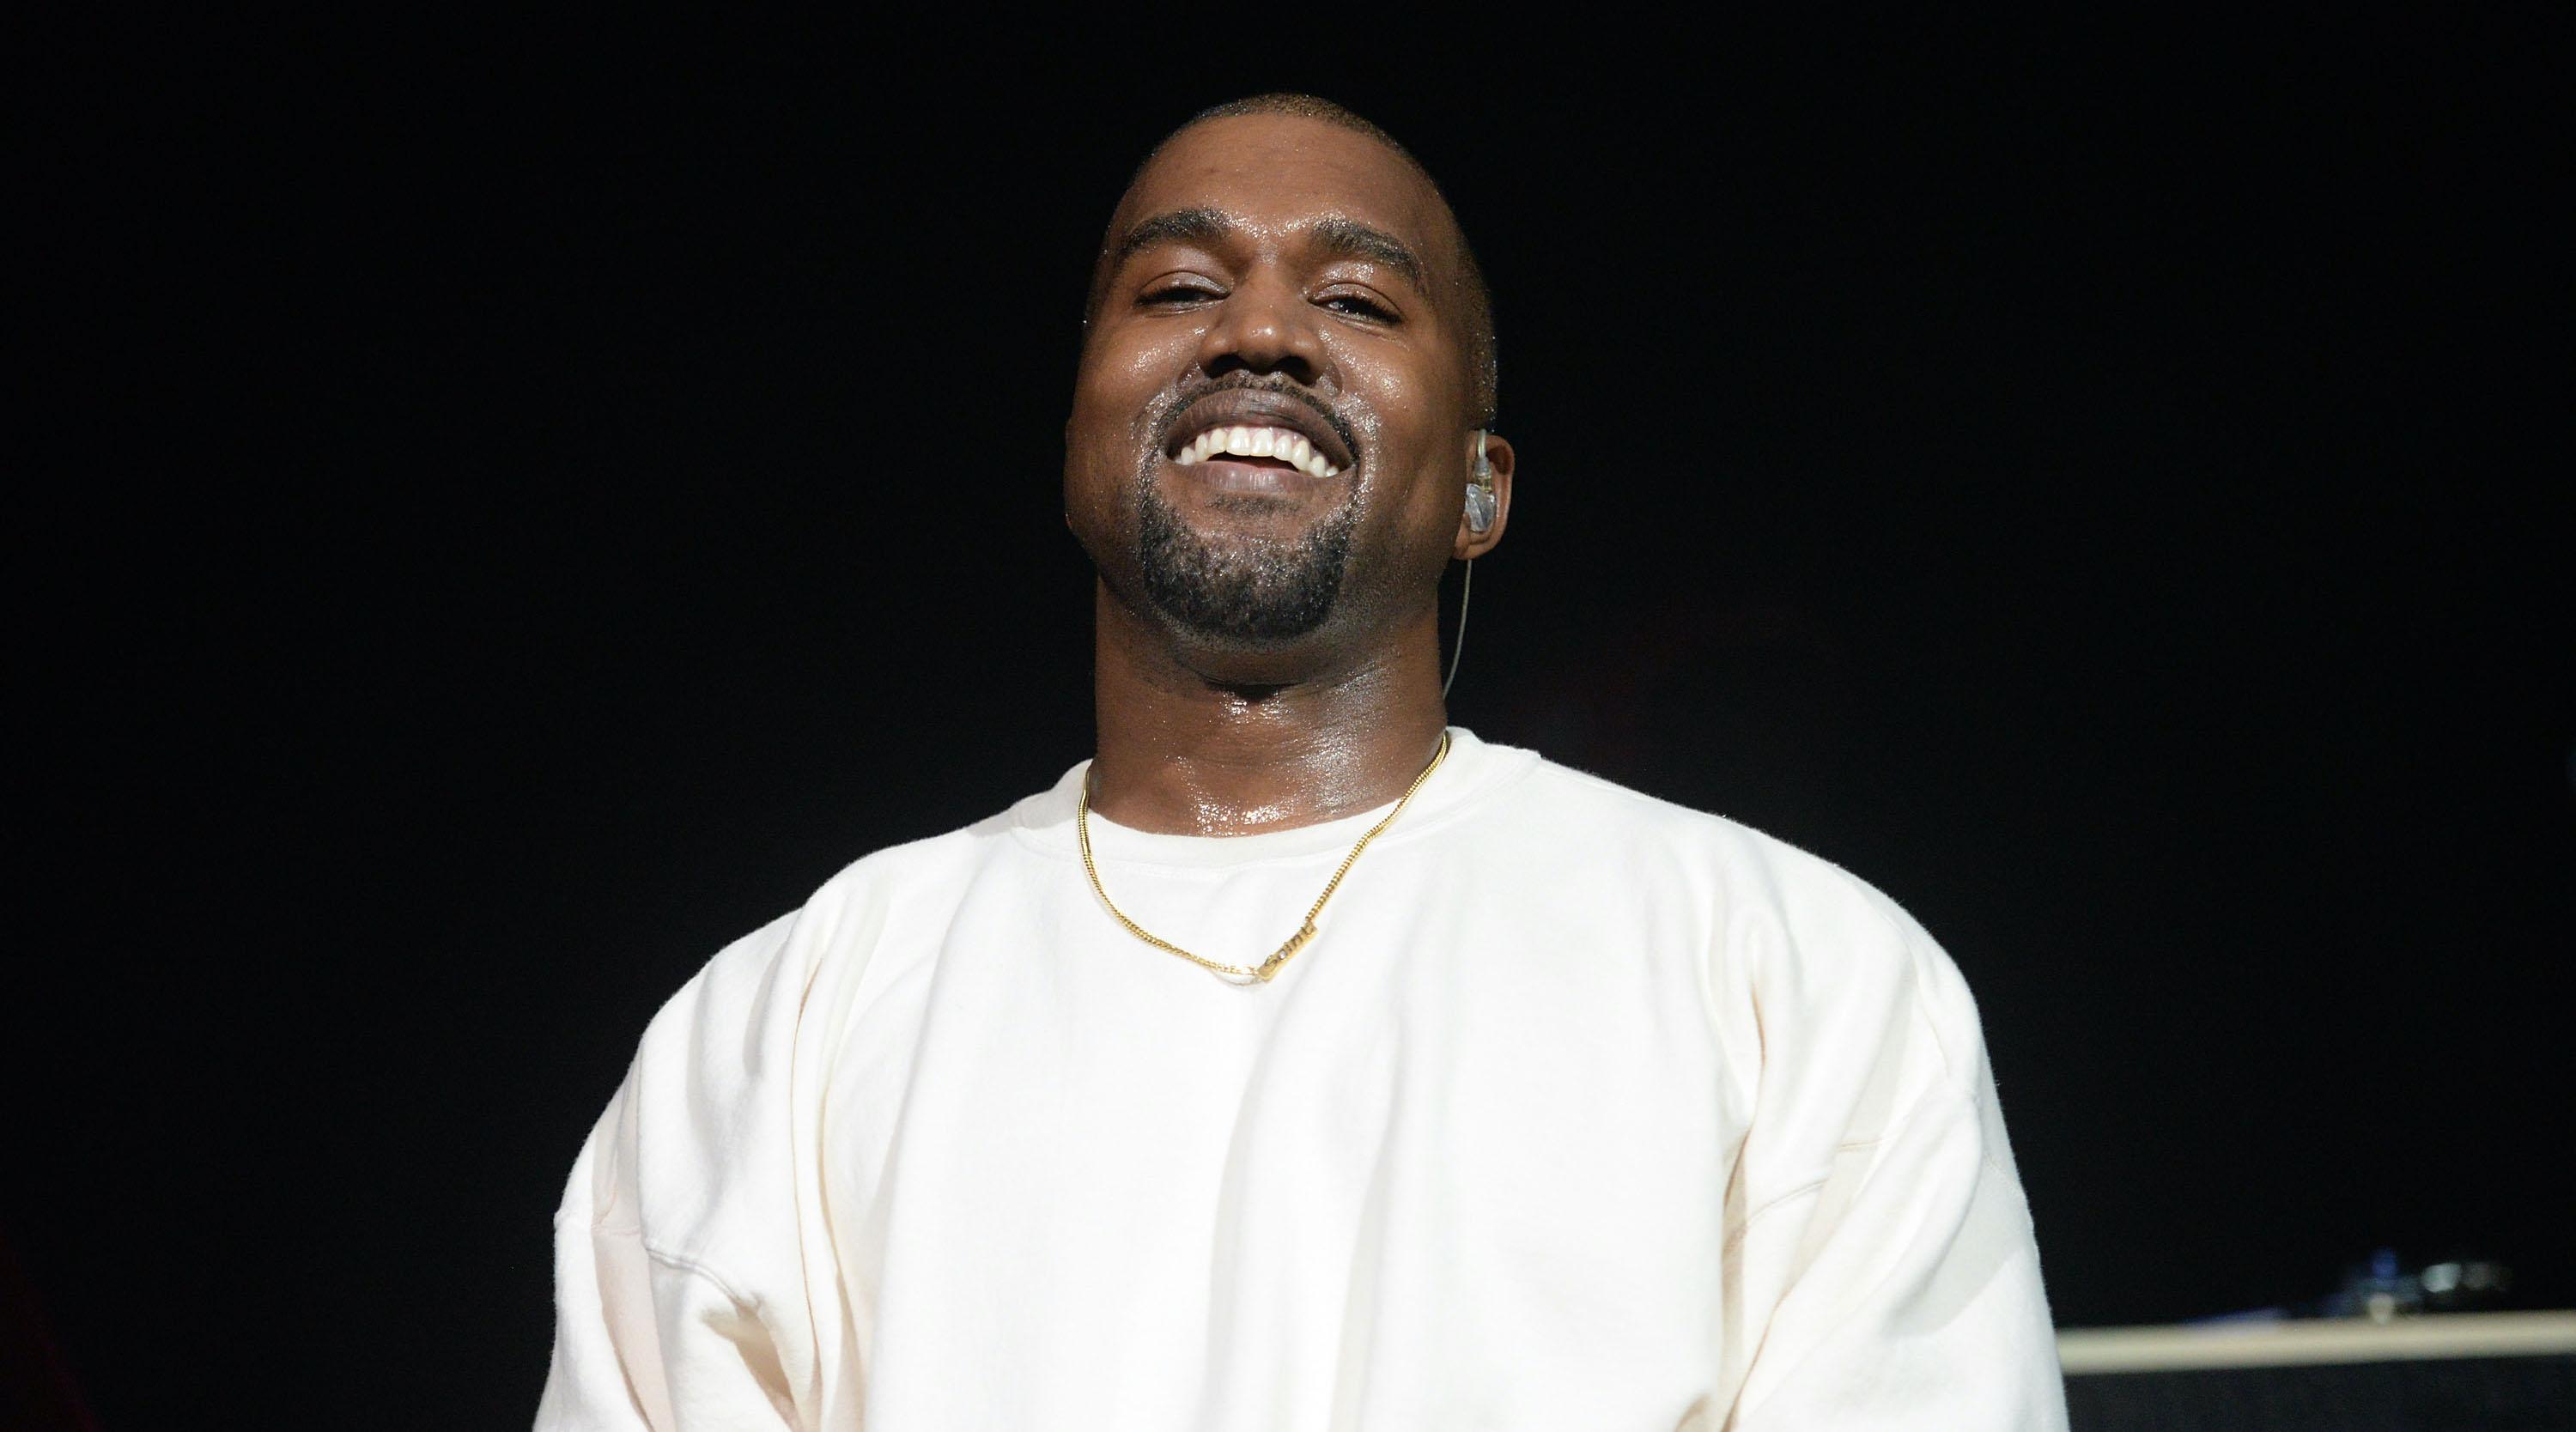 Who Owns Adidas? Kanye West Claims to 